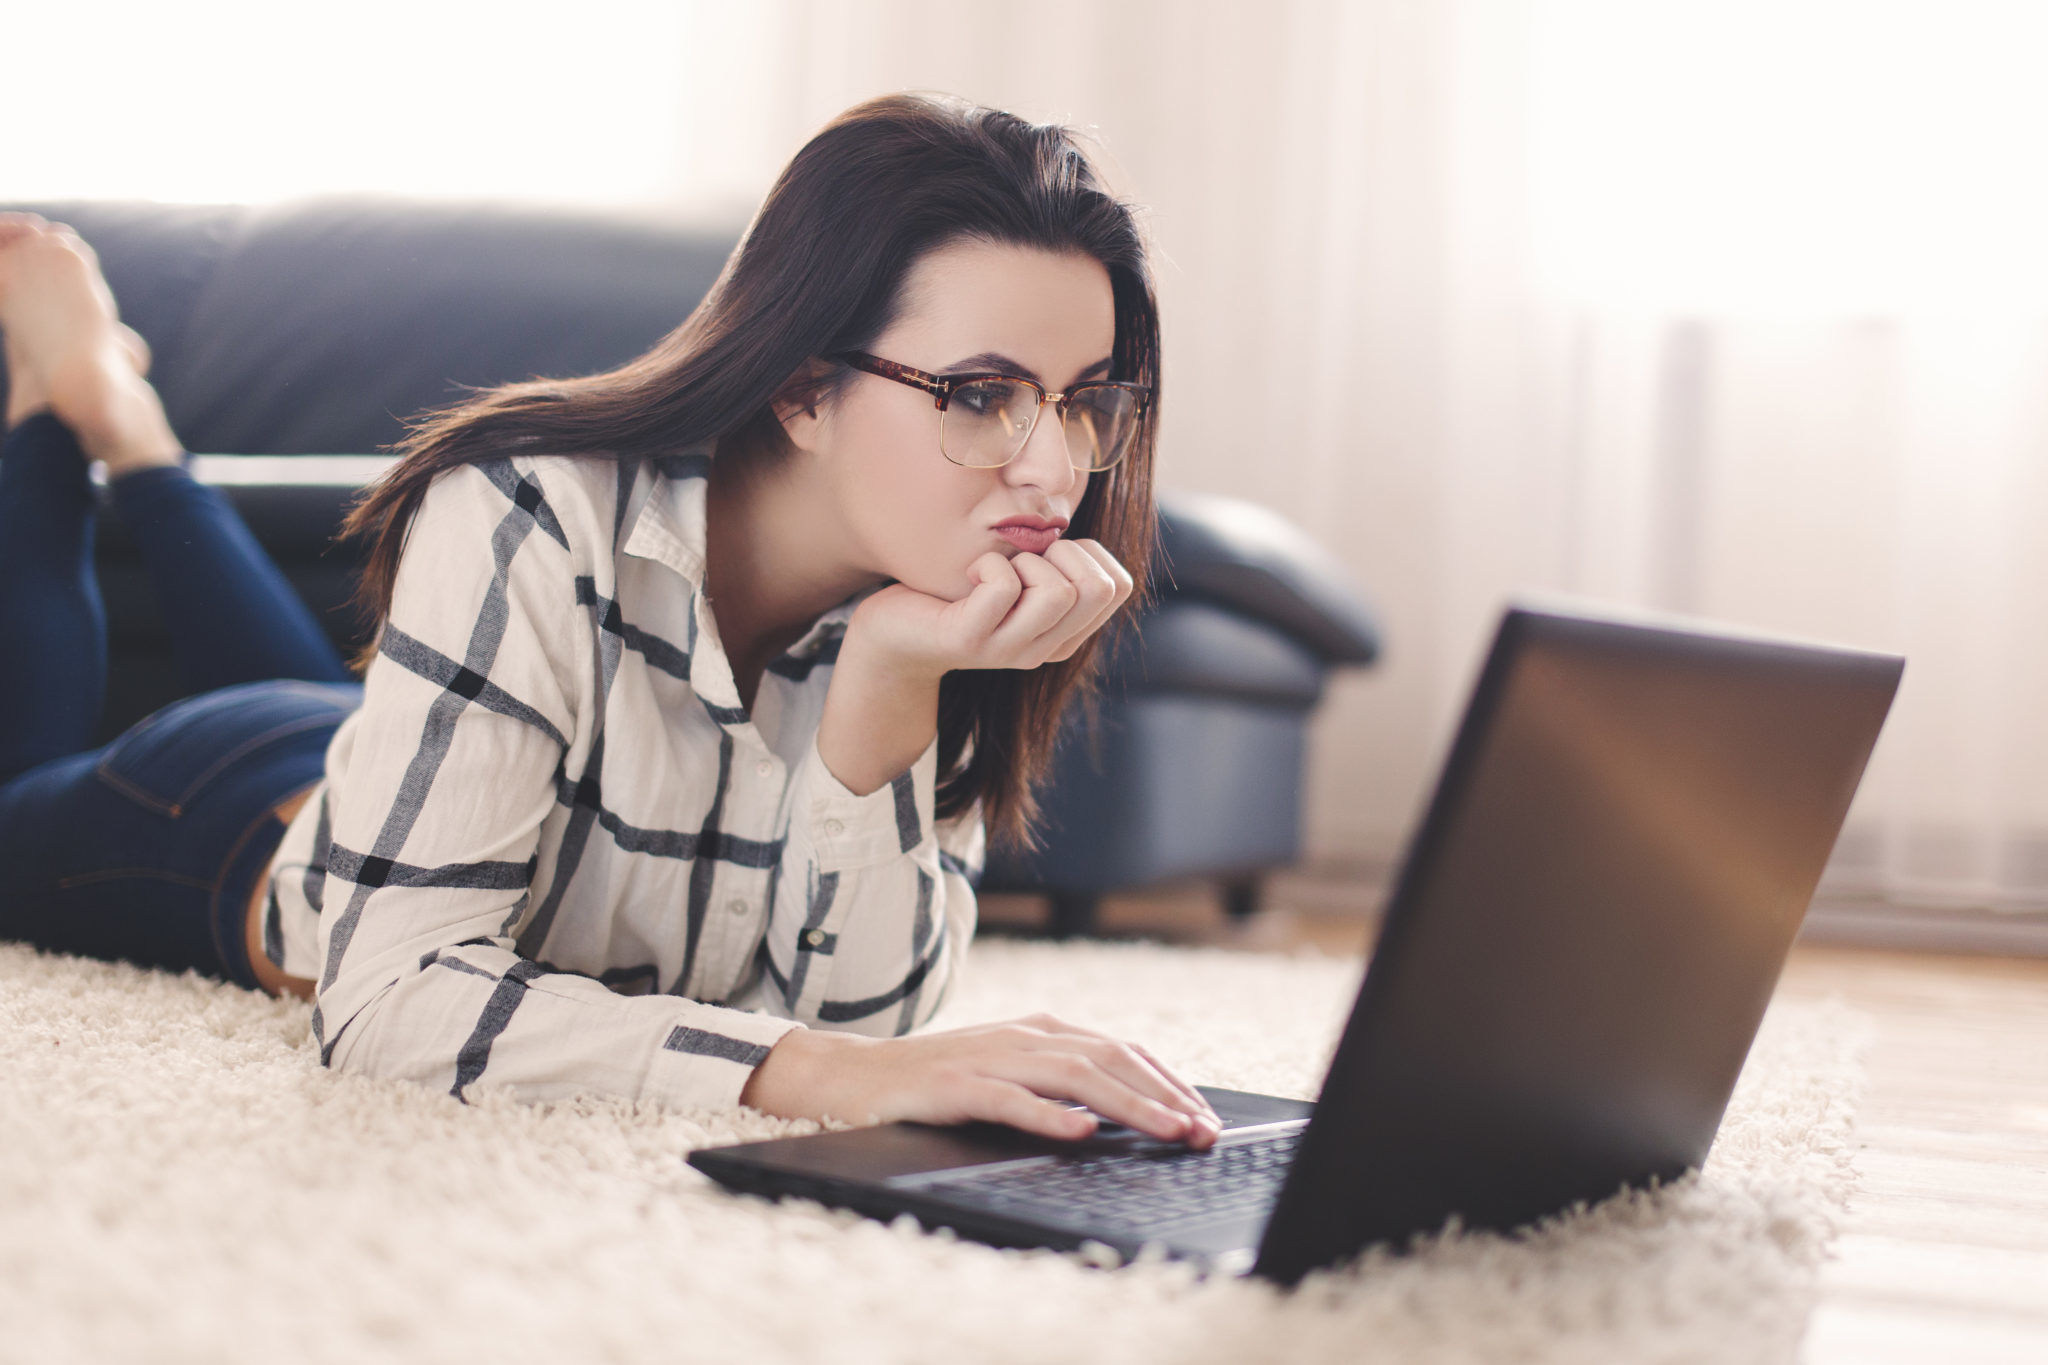 Woman searching for boys online on laptop indoor